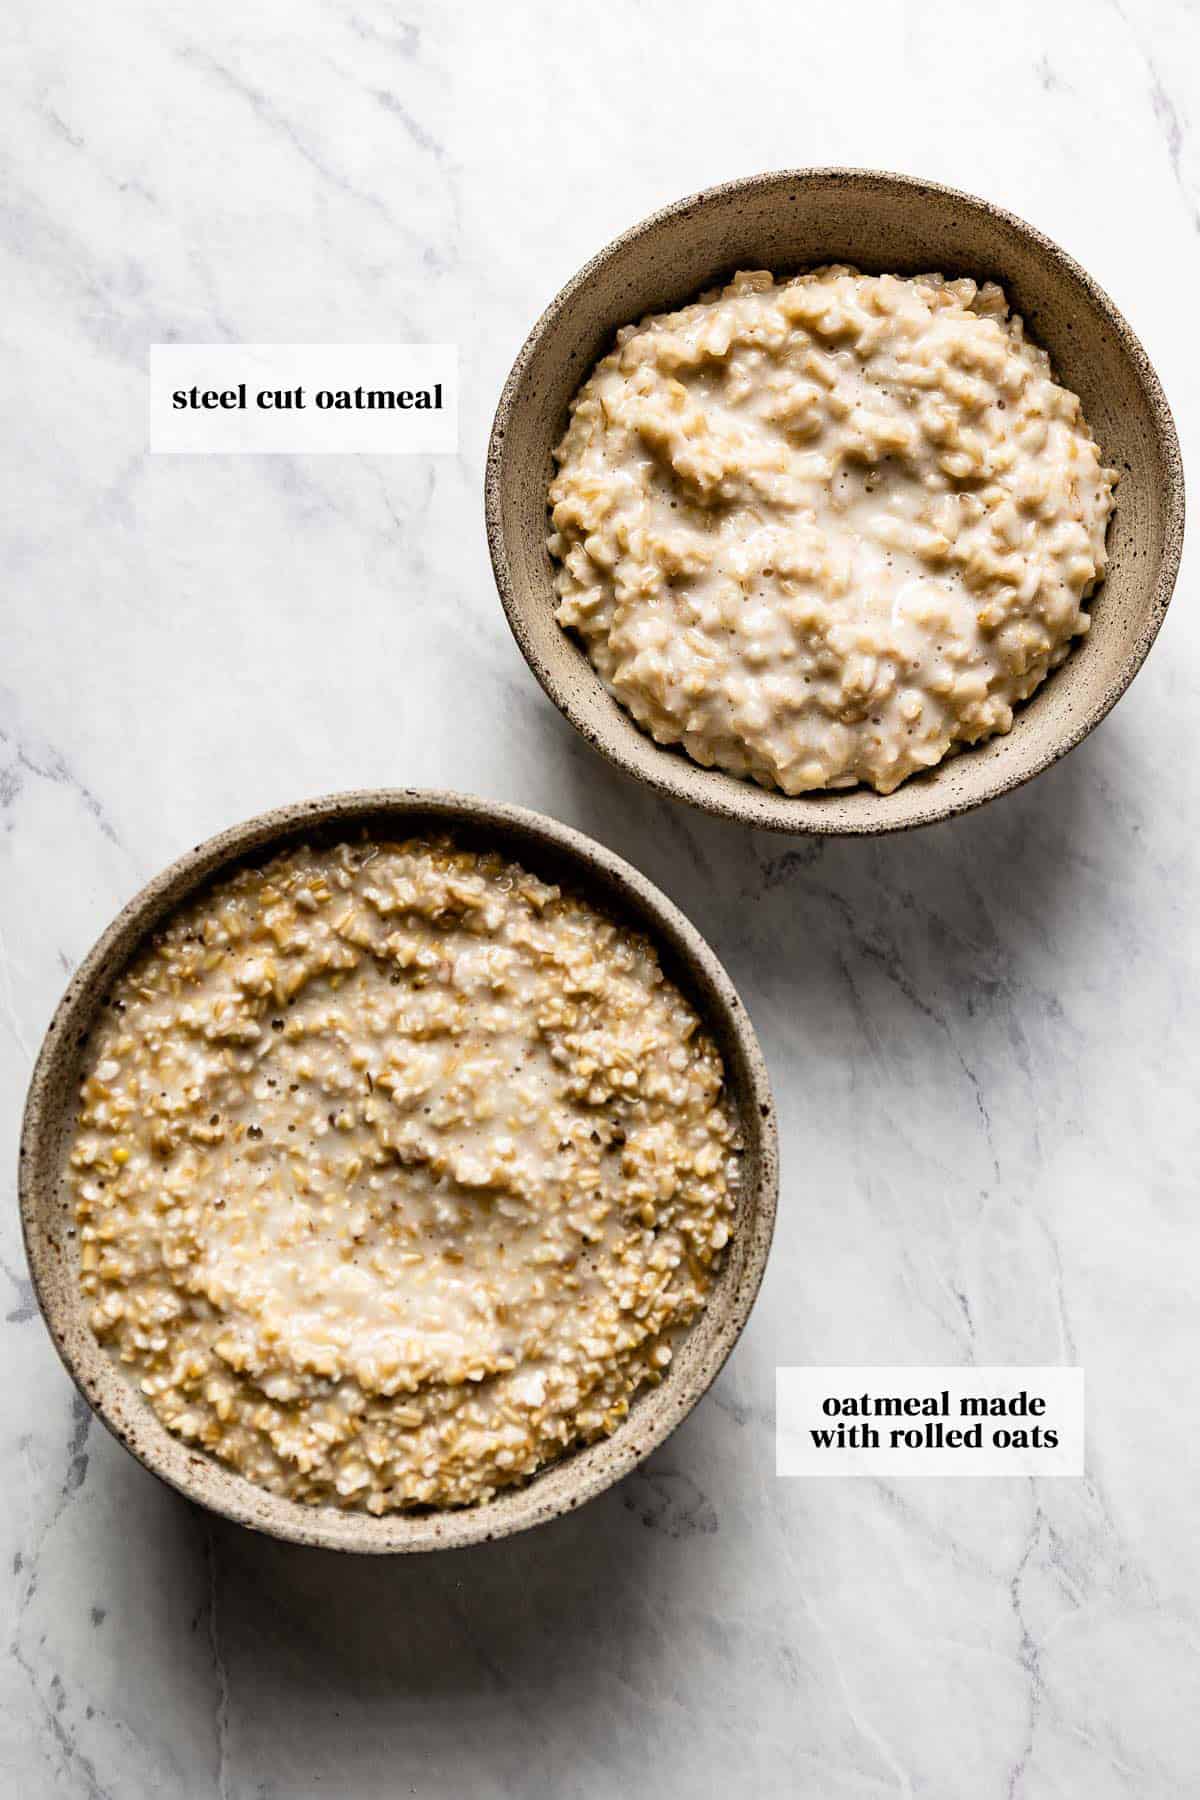 Steel cut oatmeal and oatmeal made with rolled oats in small bowls from the top view.